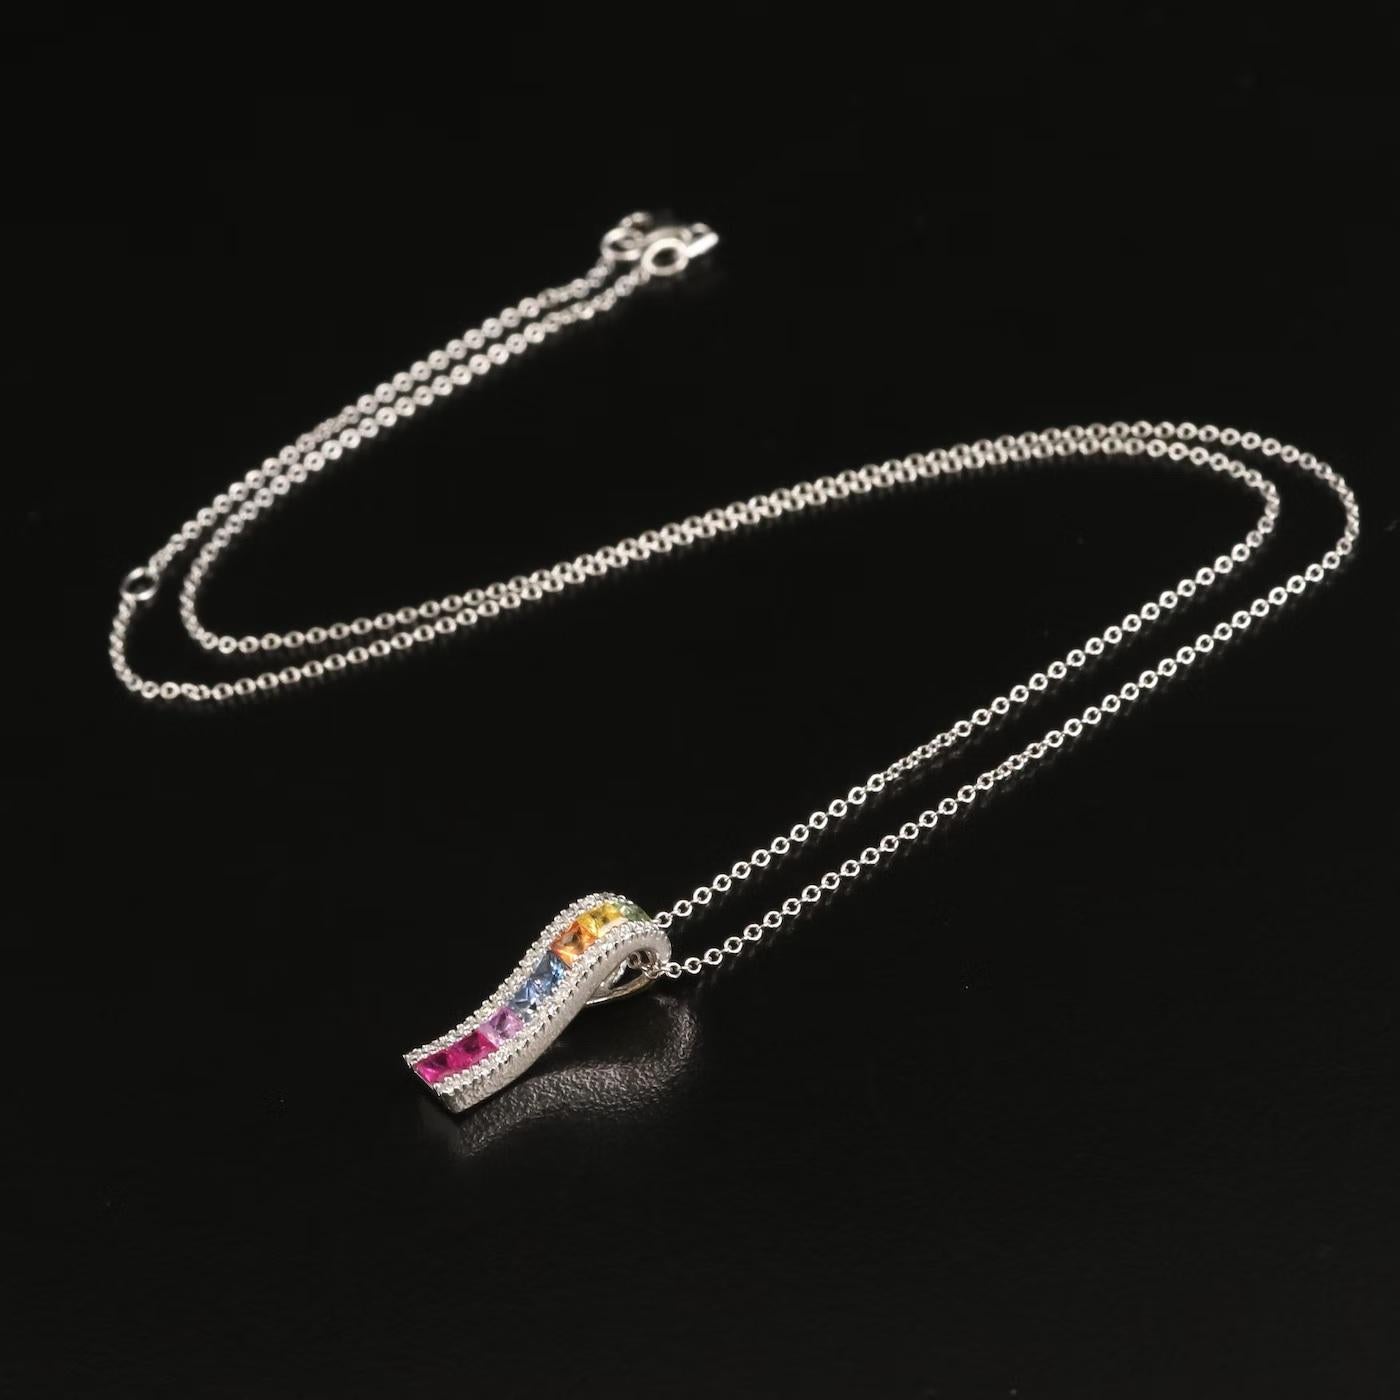 Effy Designer Necklace, stamped and hallmarked

Watercolors collection

NEW with Tags, Tag price $4500

1.17 CWT Natural Diamond & Ceylon multicolor Natural sapphire, TOP QUALITY 

14K White Gold, stamped 14K

Comes with gift box